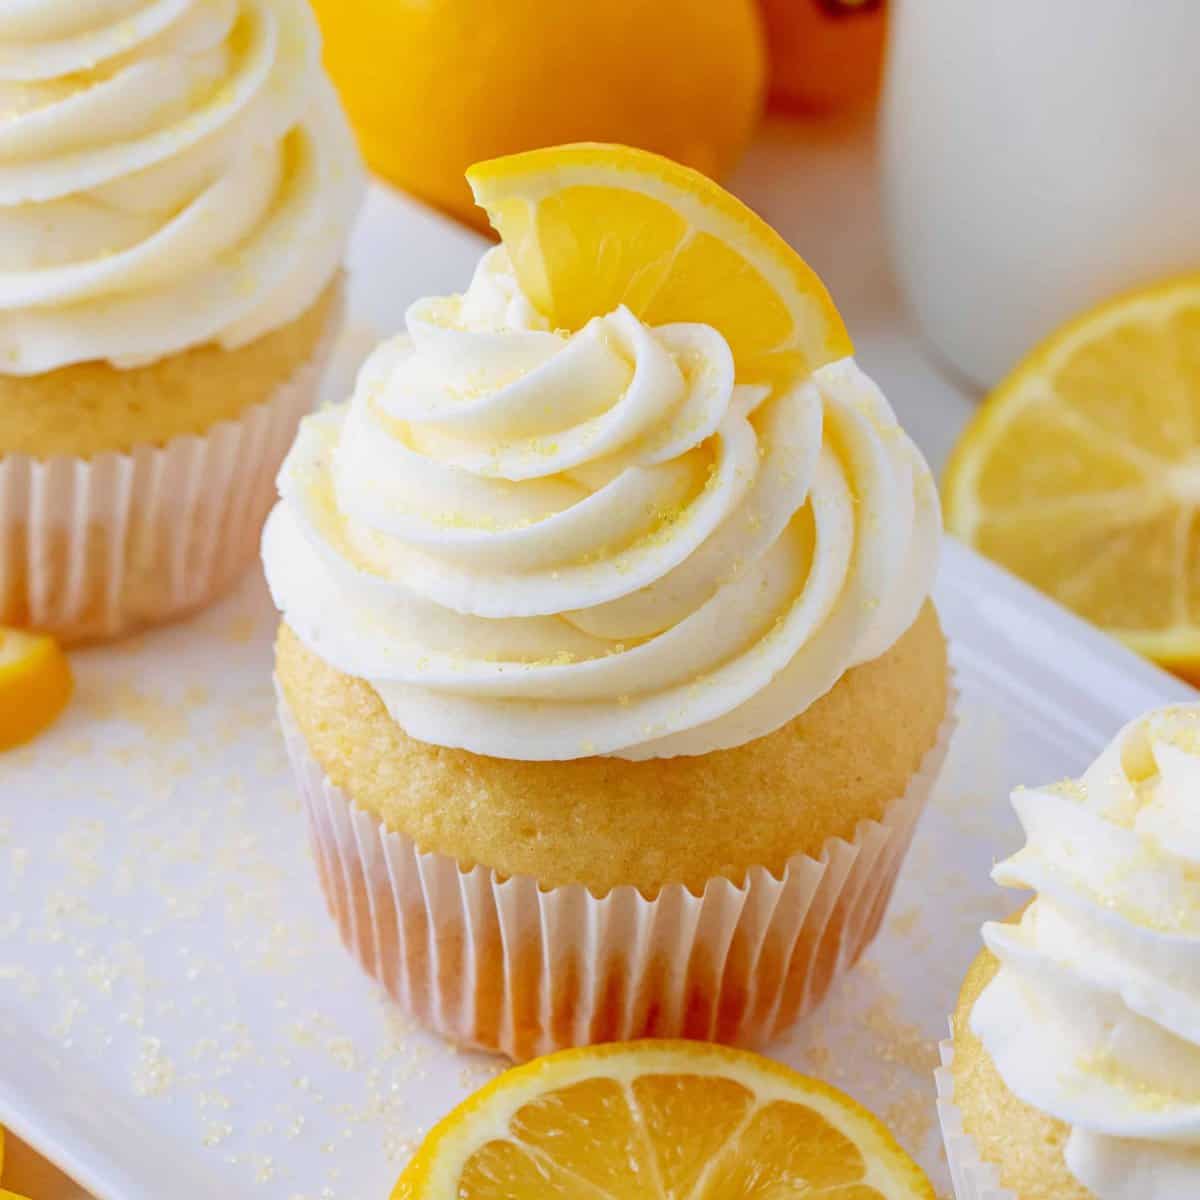 Homemade Lemon Cupcakes - The Country Cook